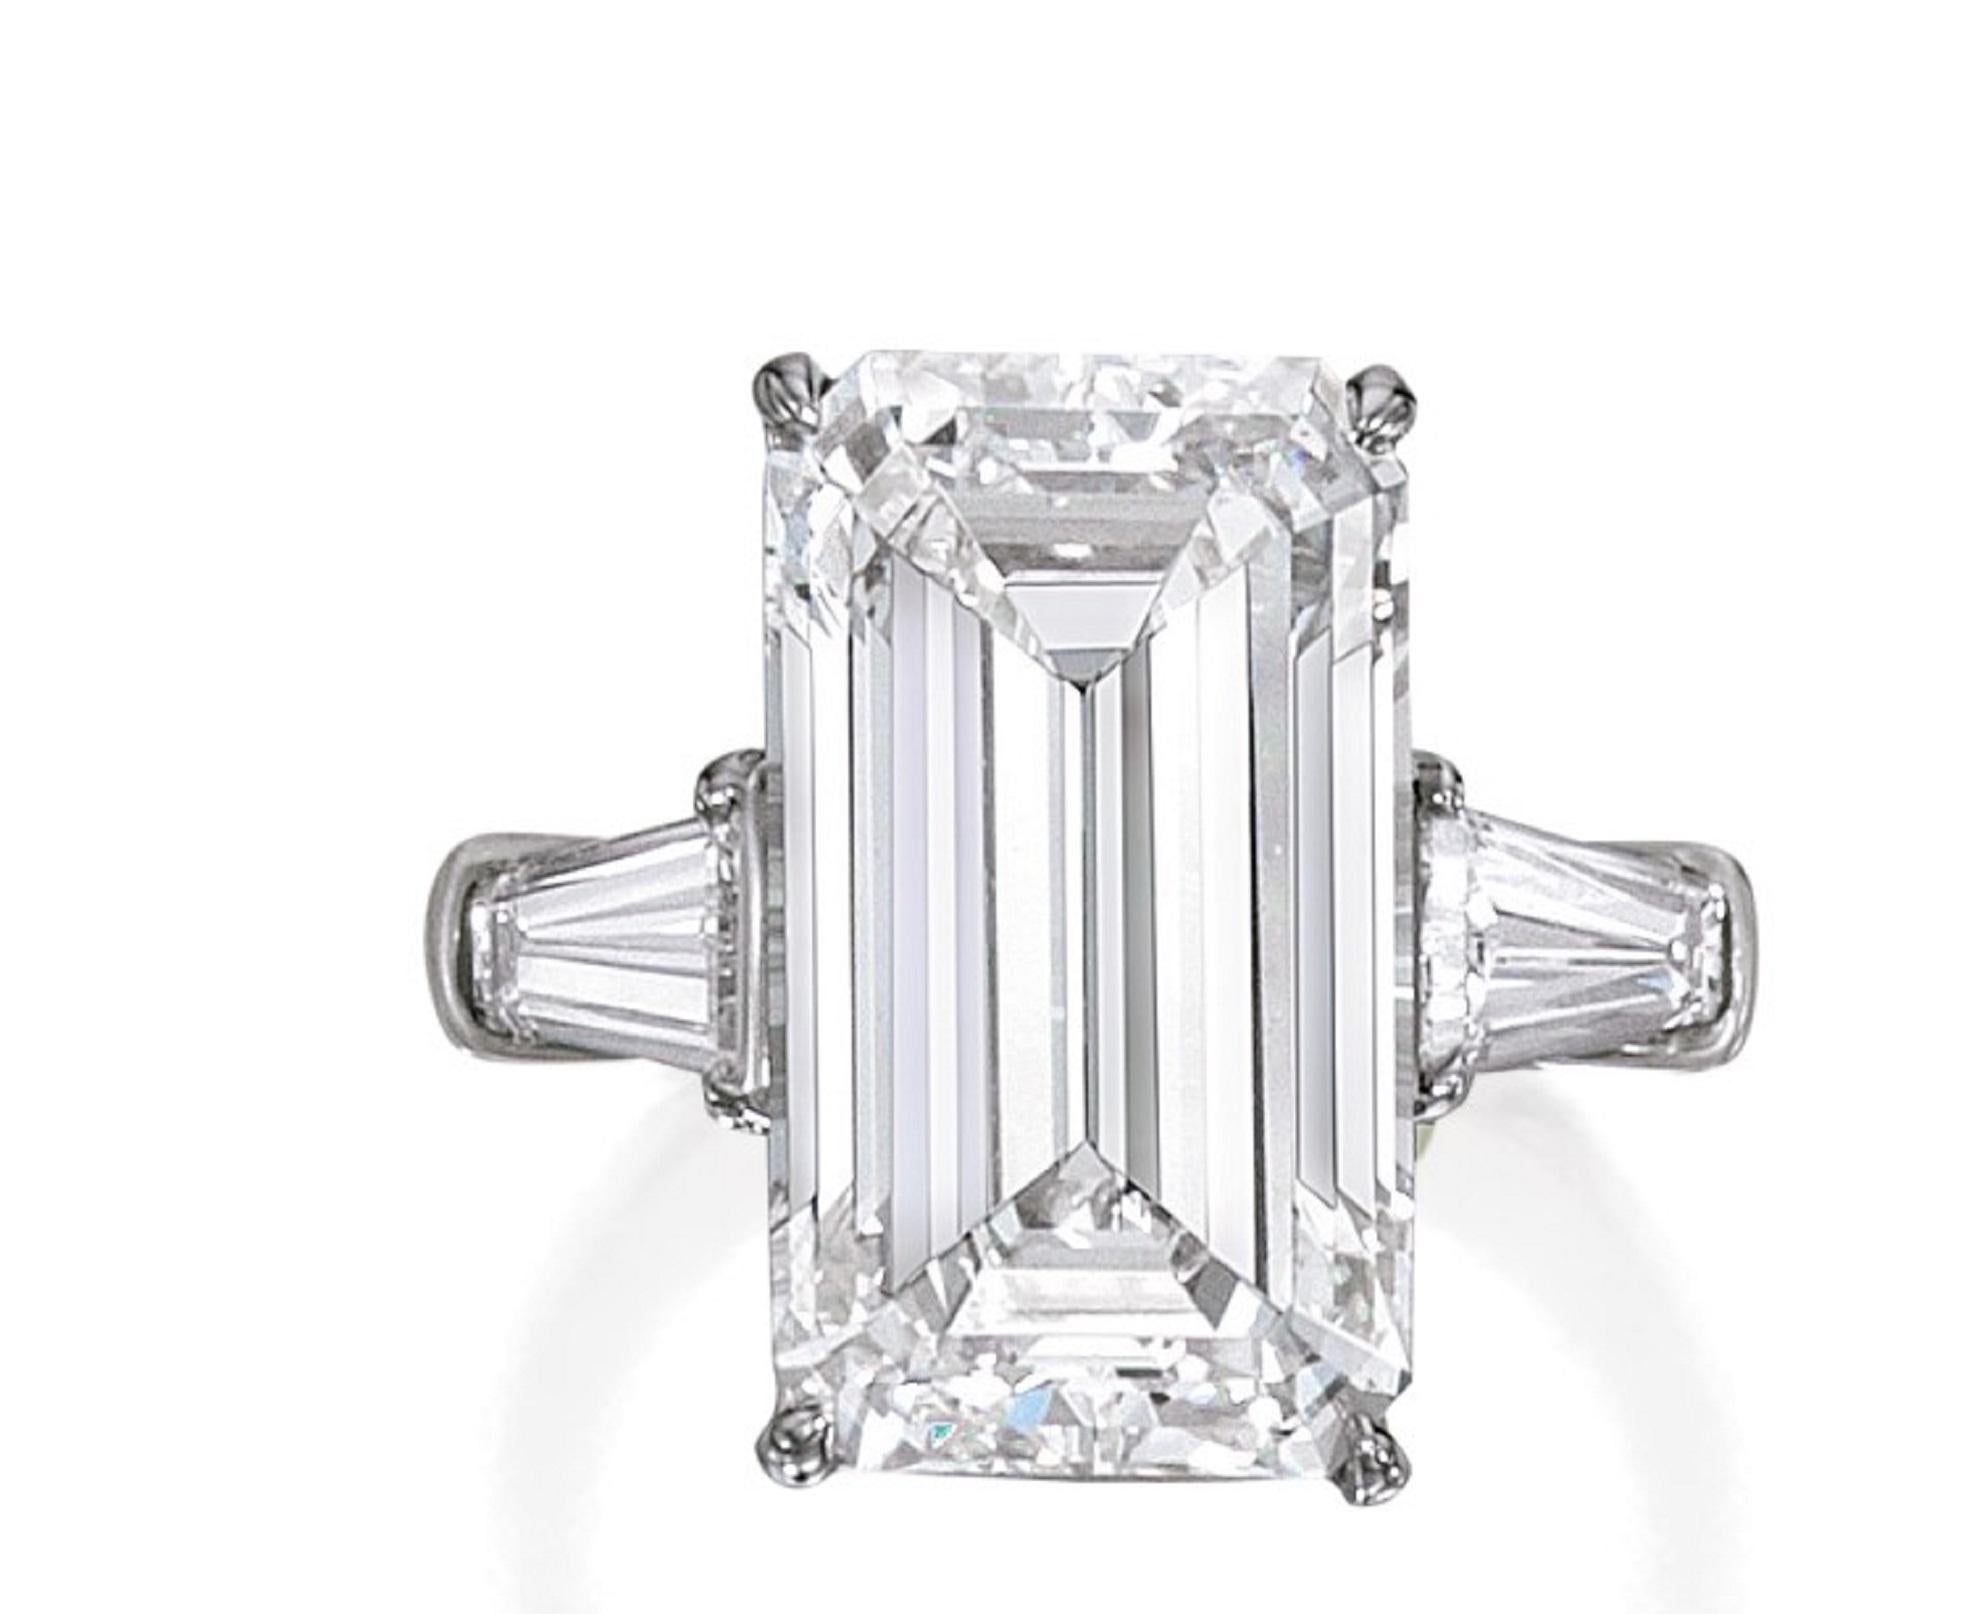 Magnificent ring with 4 carat emerald cut diamond in D color and flawless in clarity.

According to its GIA report, the emerald cut diamond on this ring was determined to be a flawless clarity diamond
This diamonds are exceptionally transparent